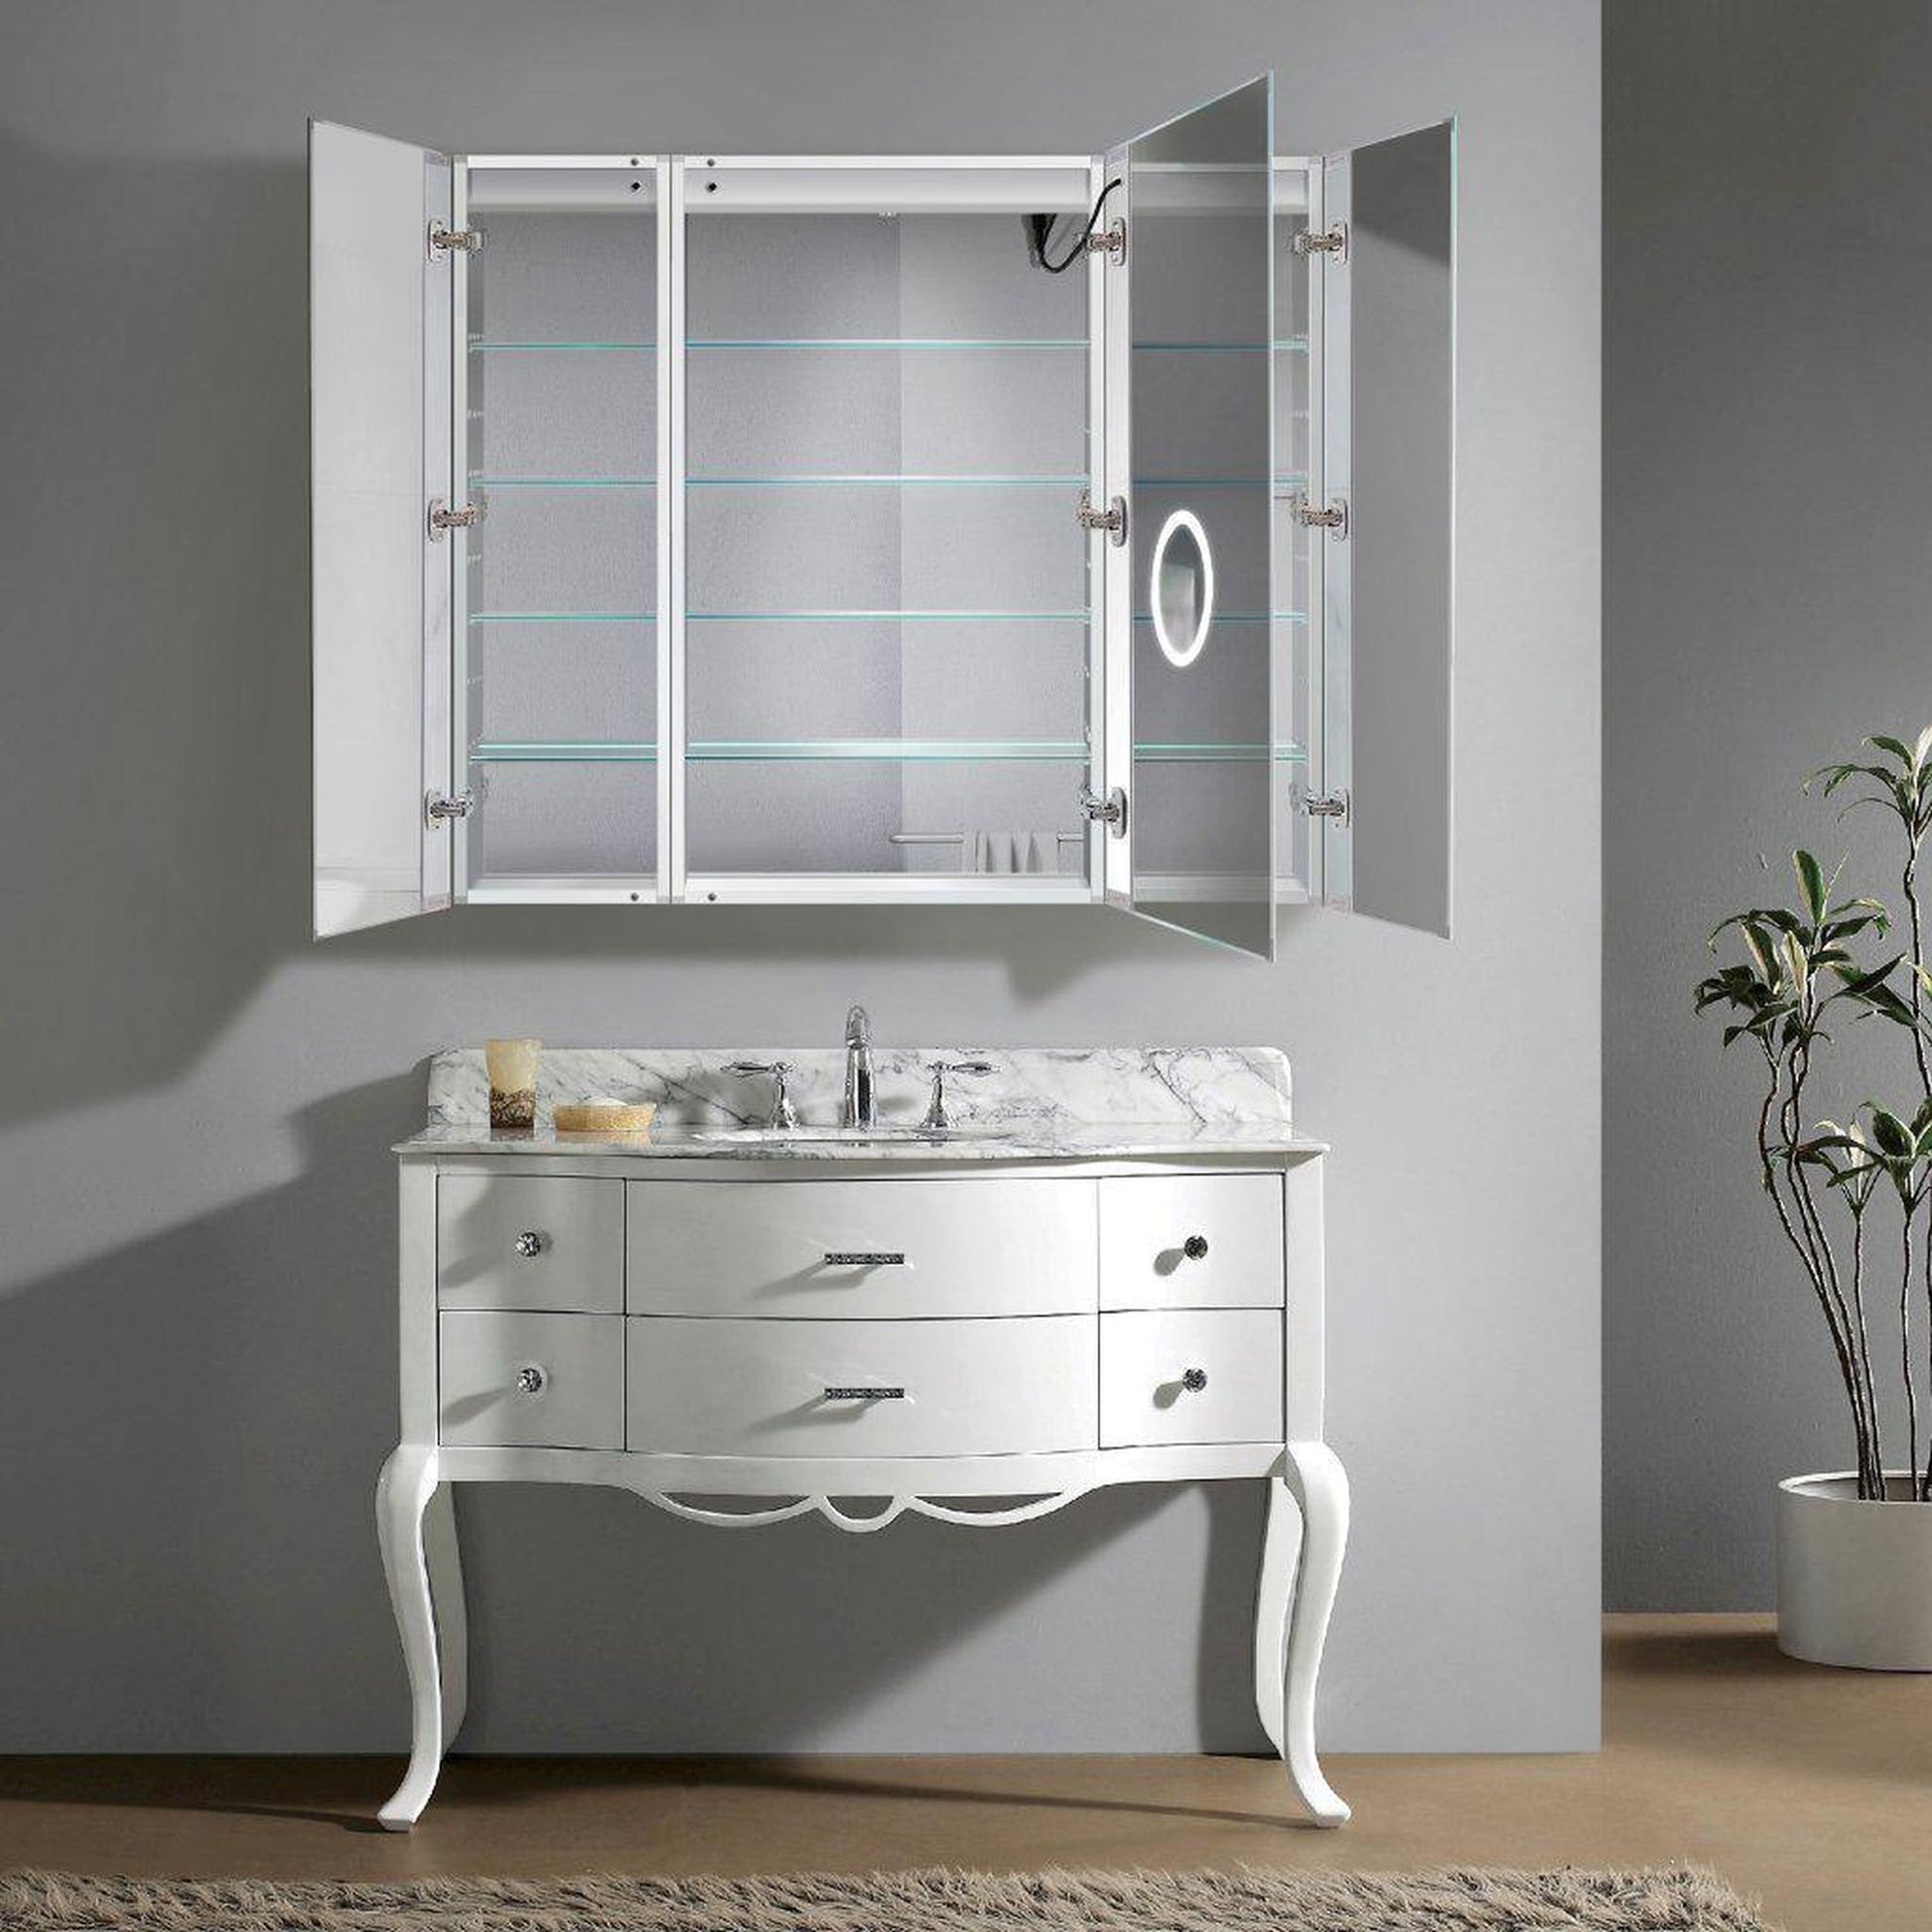 Krugg Reflections Svange 48" x 42" 5000K Single Tri-View Left-Right-Right Opening Recessed/Surface-Mount Illuminated Silver Backed LED Medicine Cabinet Mirror With Built-in Defogger, Dimmer and Electrical Outlet